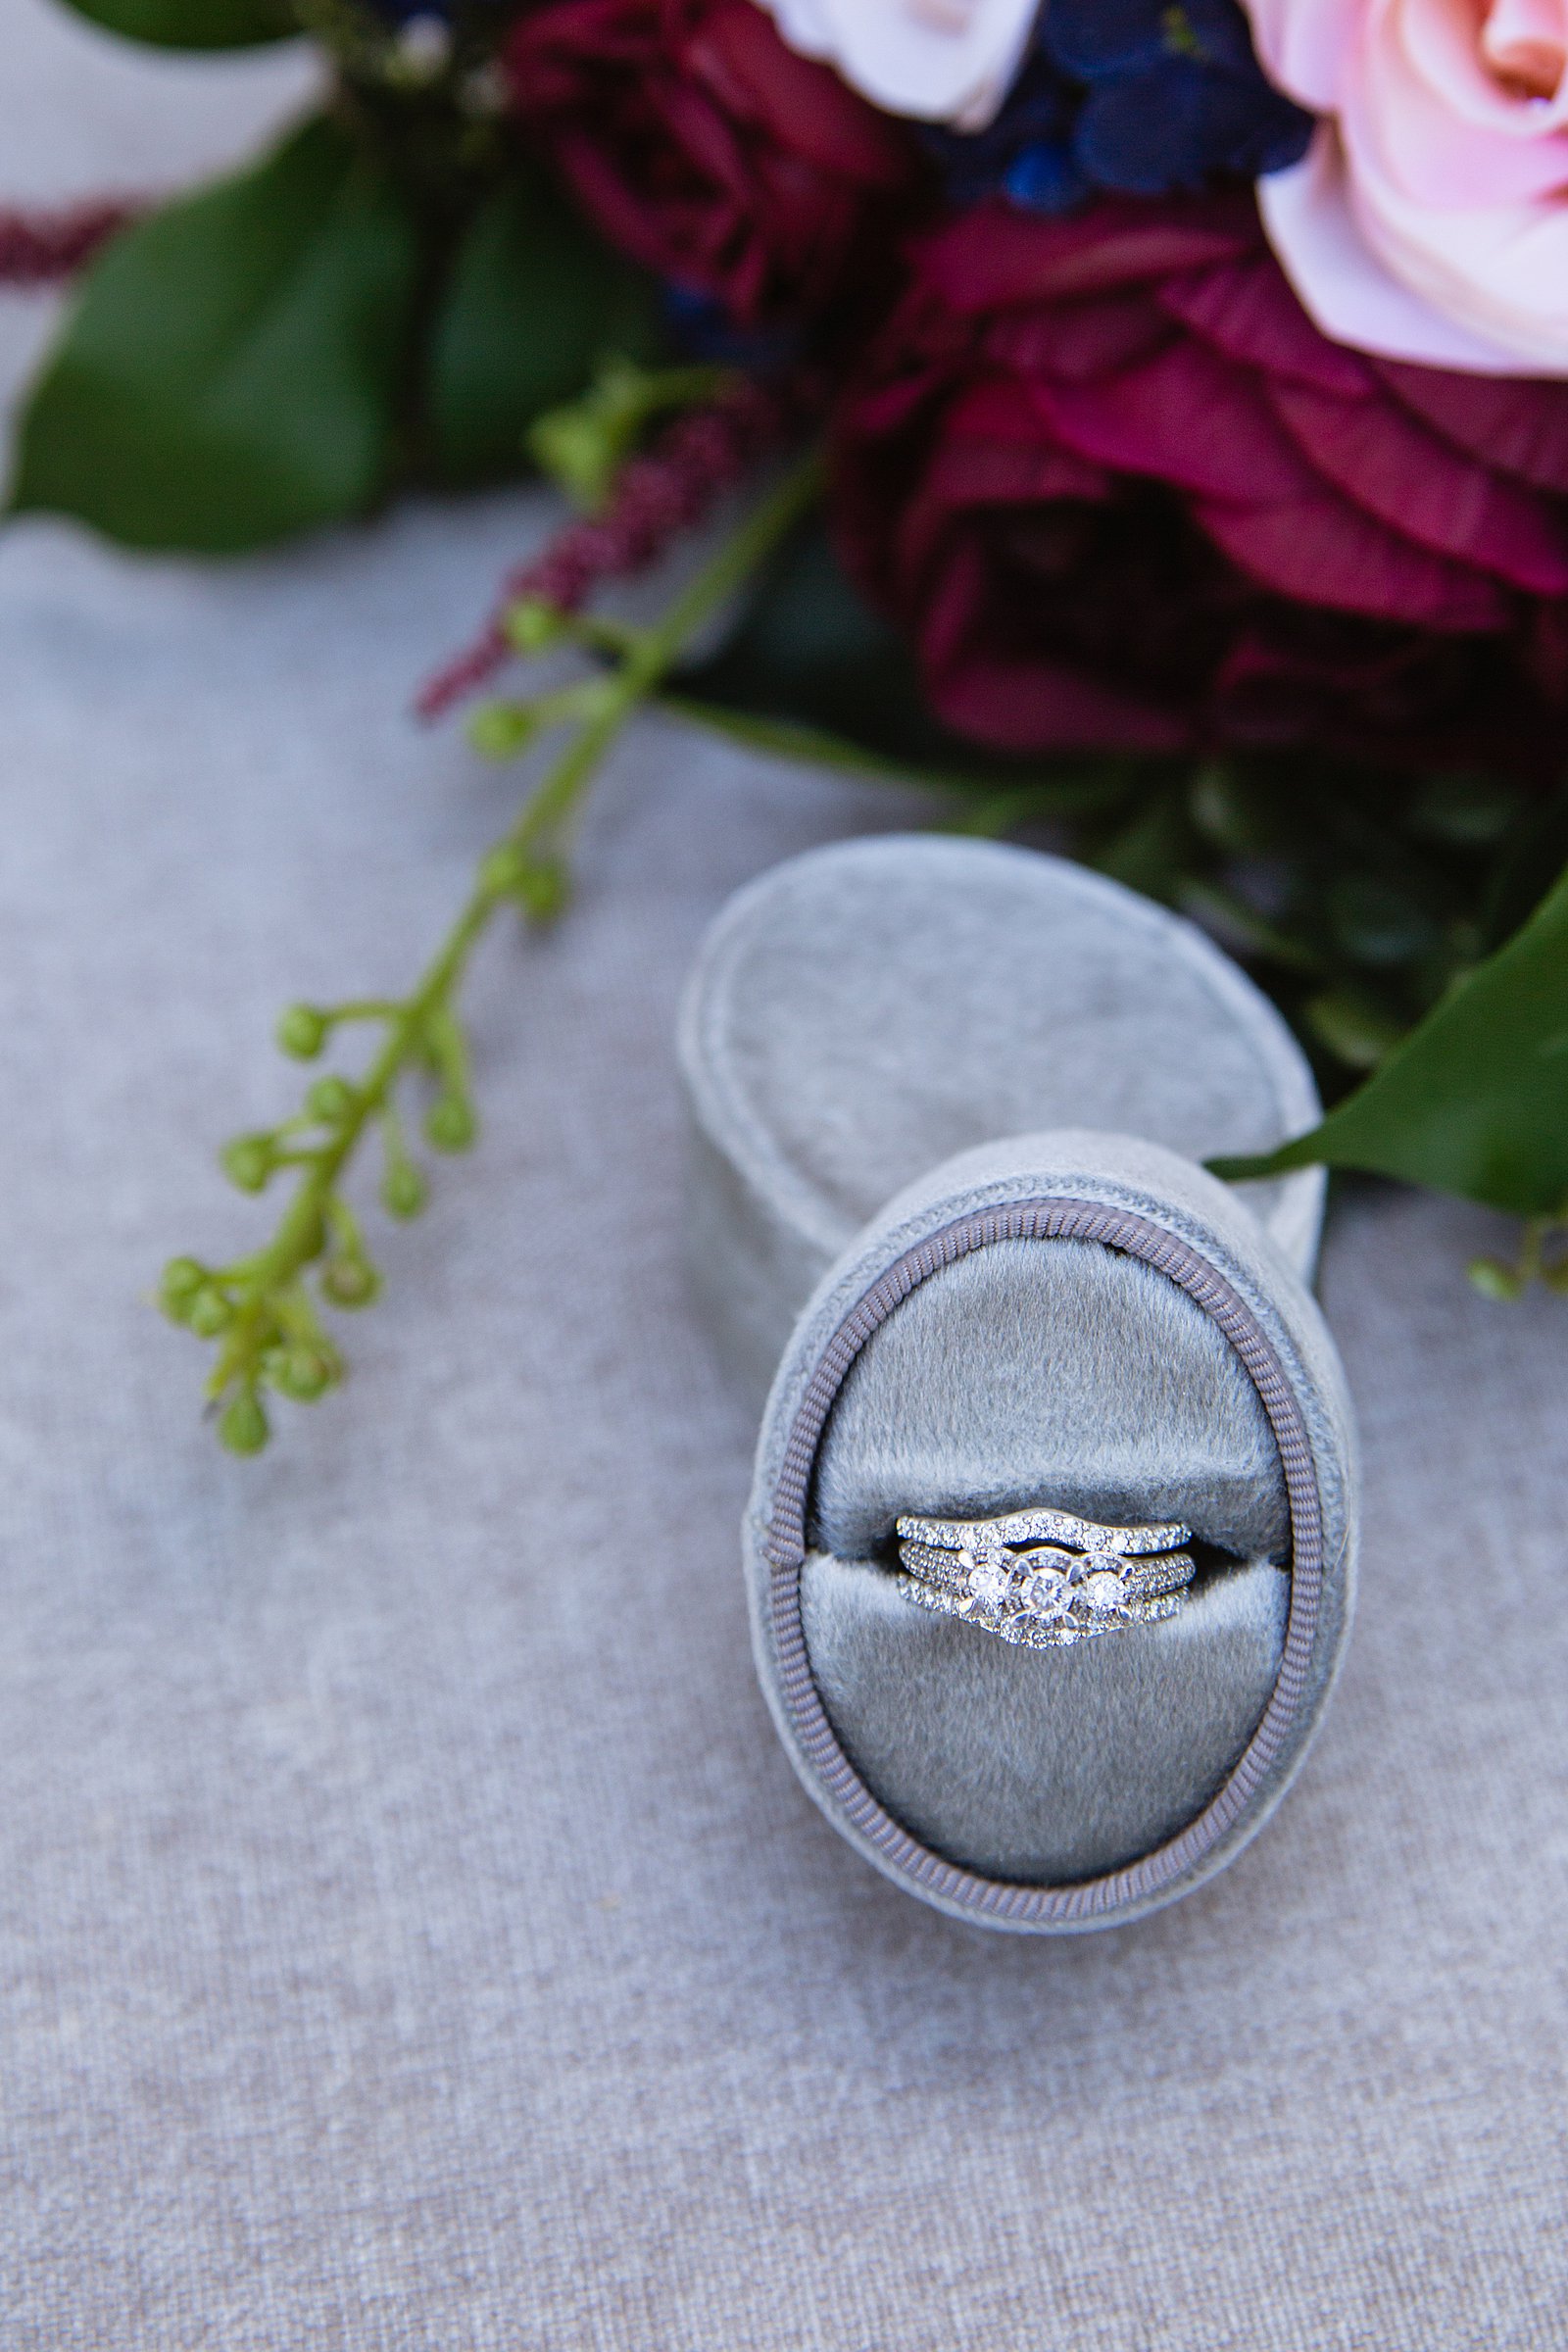 Brides's wedding day details of a white gold and diamond wedding ring by PMA Photography.